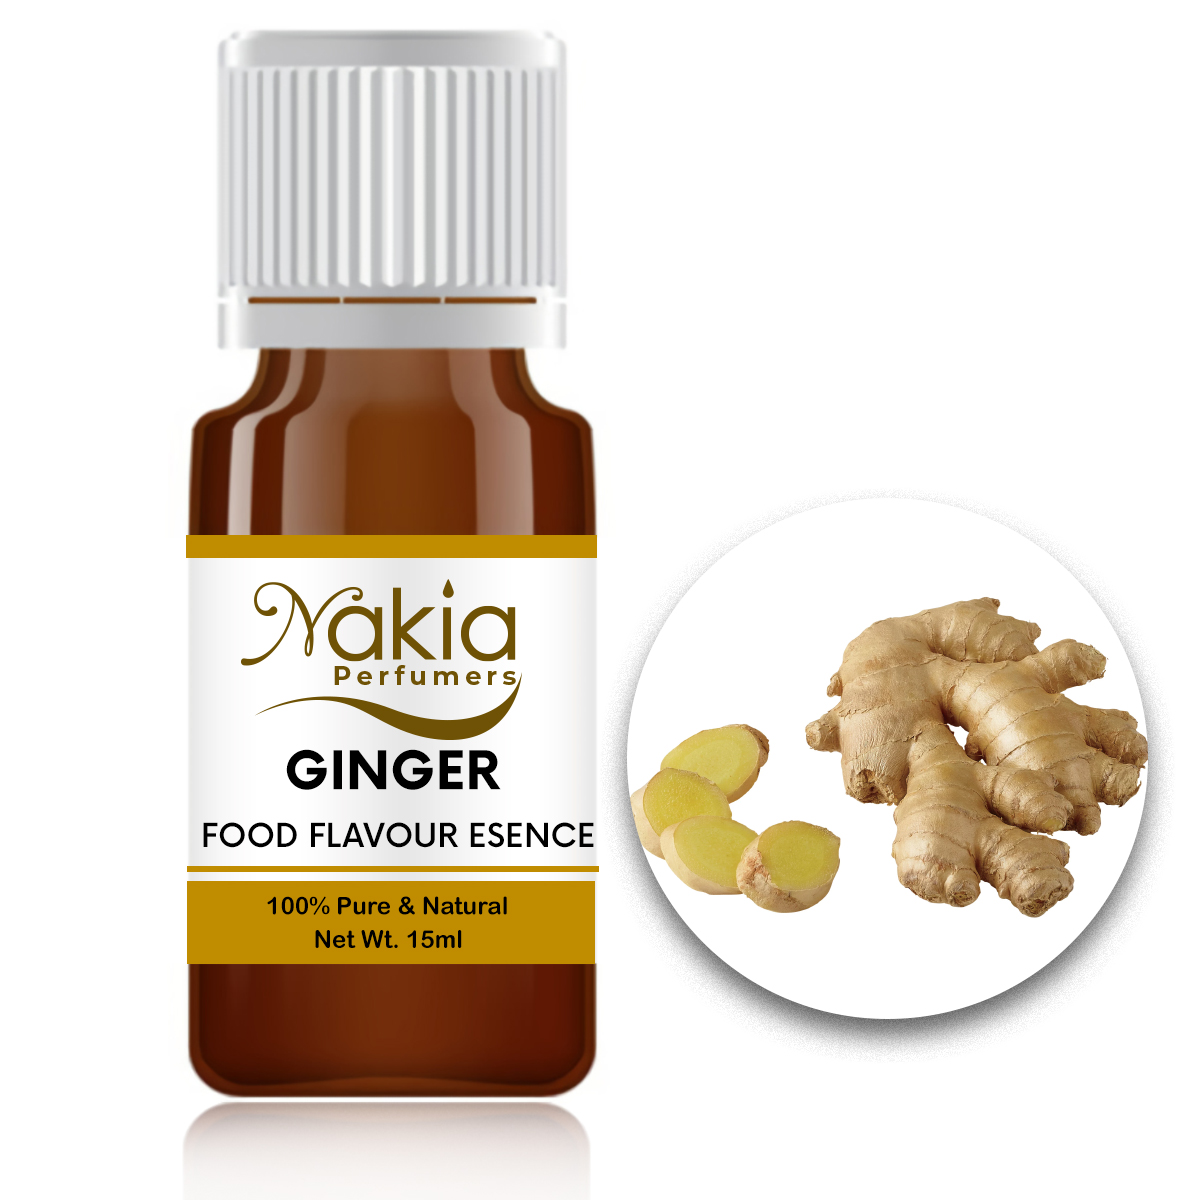 GINGER FLAVOURING ESSENCE